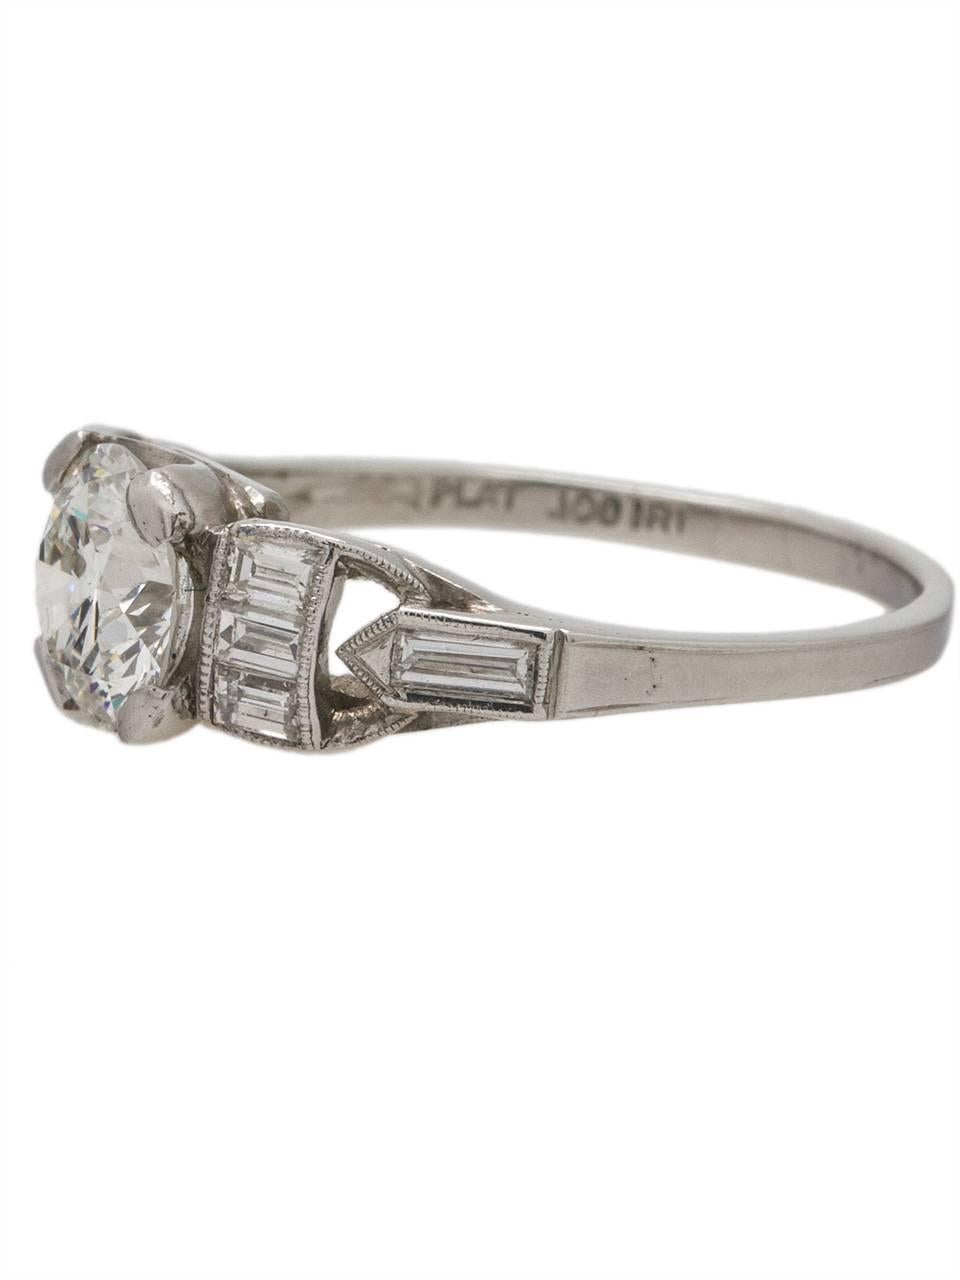 Vintage Diamond Engagement Ring Platinum 1.03 Carat E-VS2, circa 1930s In Excellent Condition For Sale In West Hollywood, CA